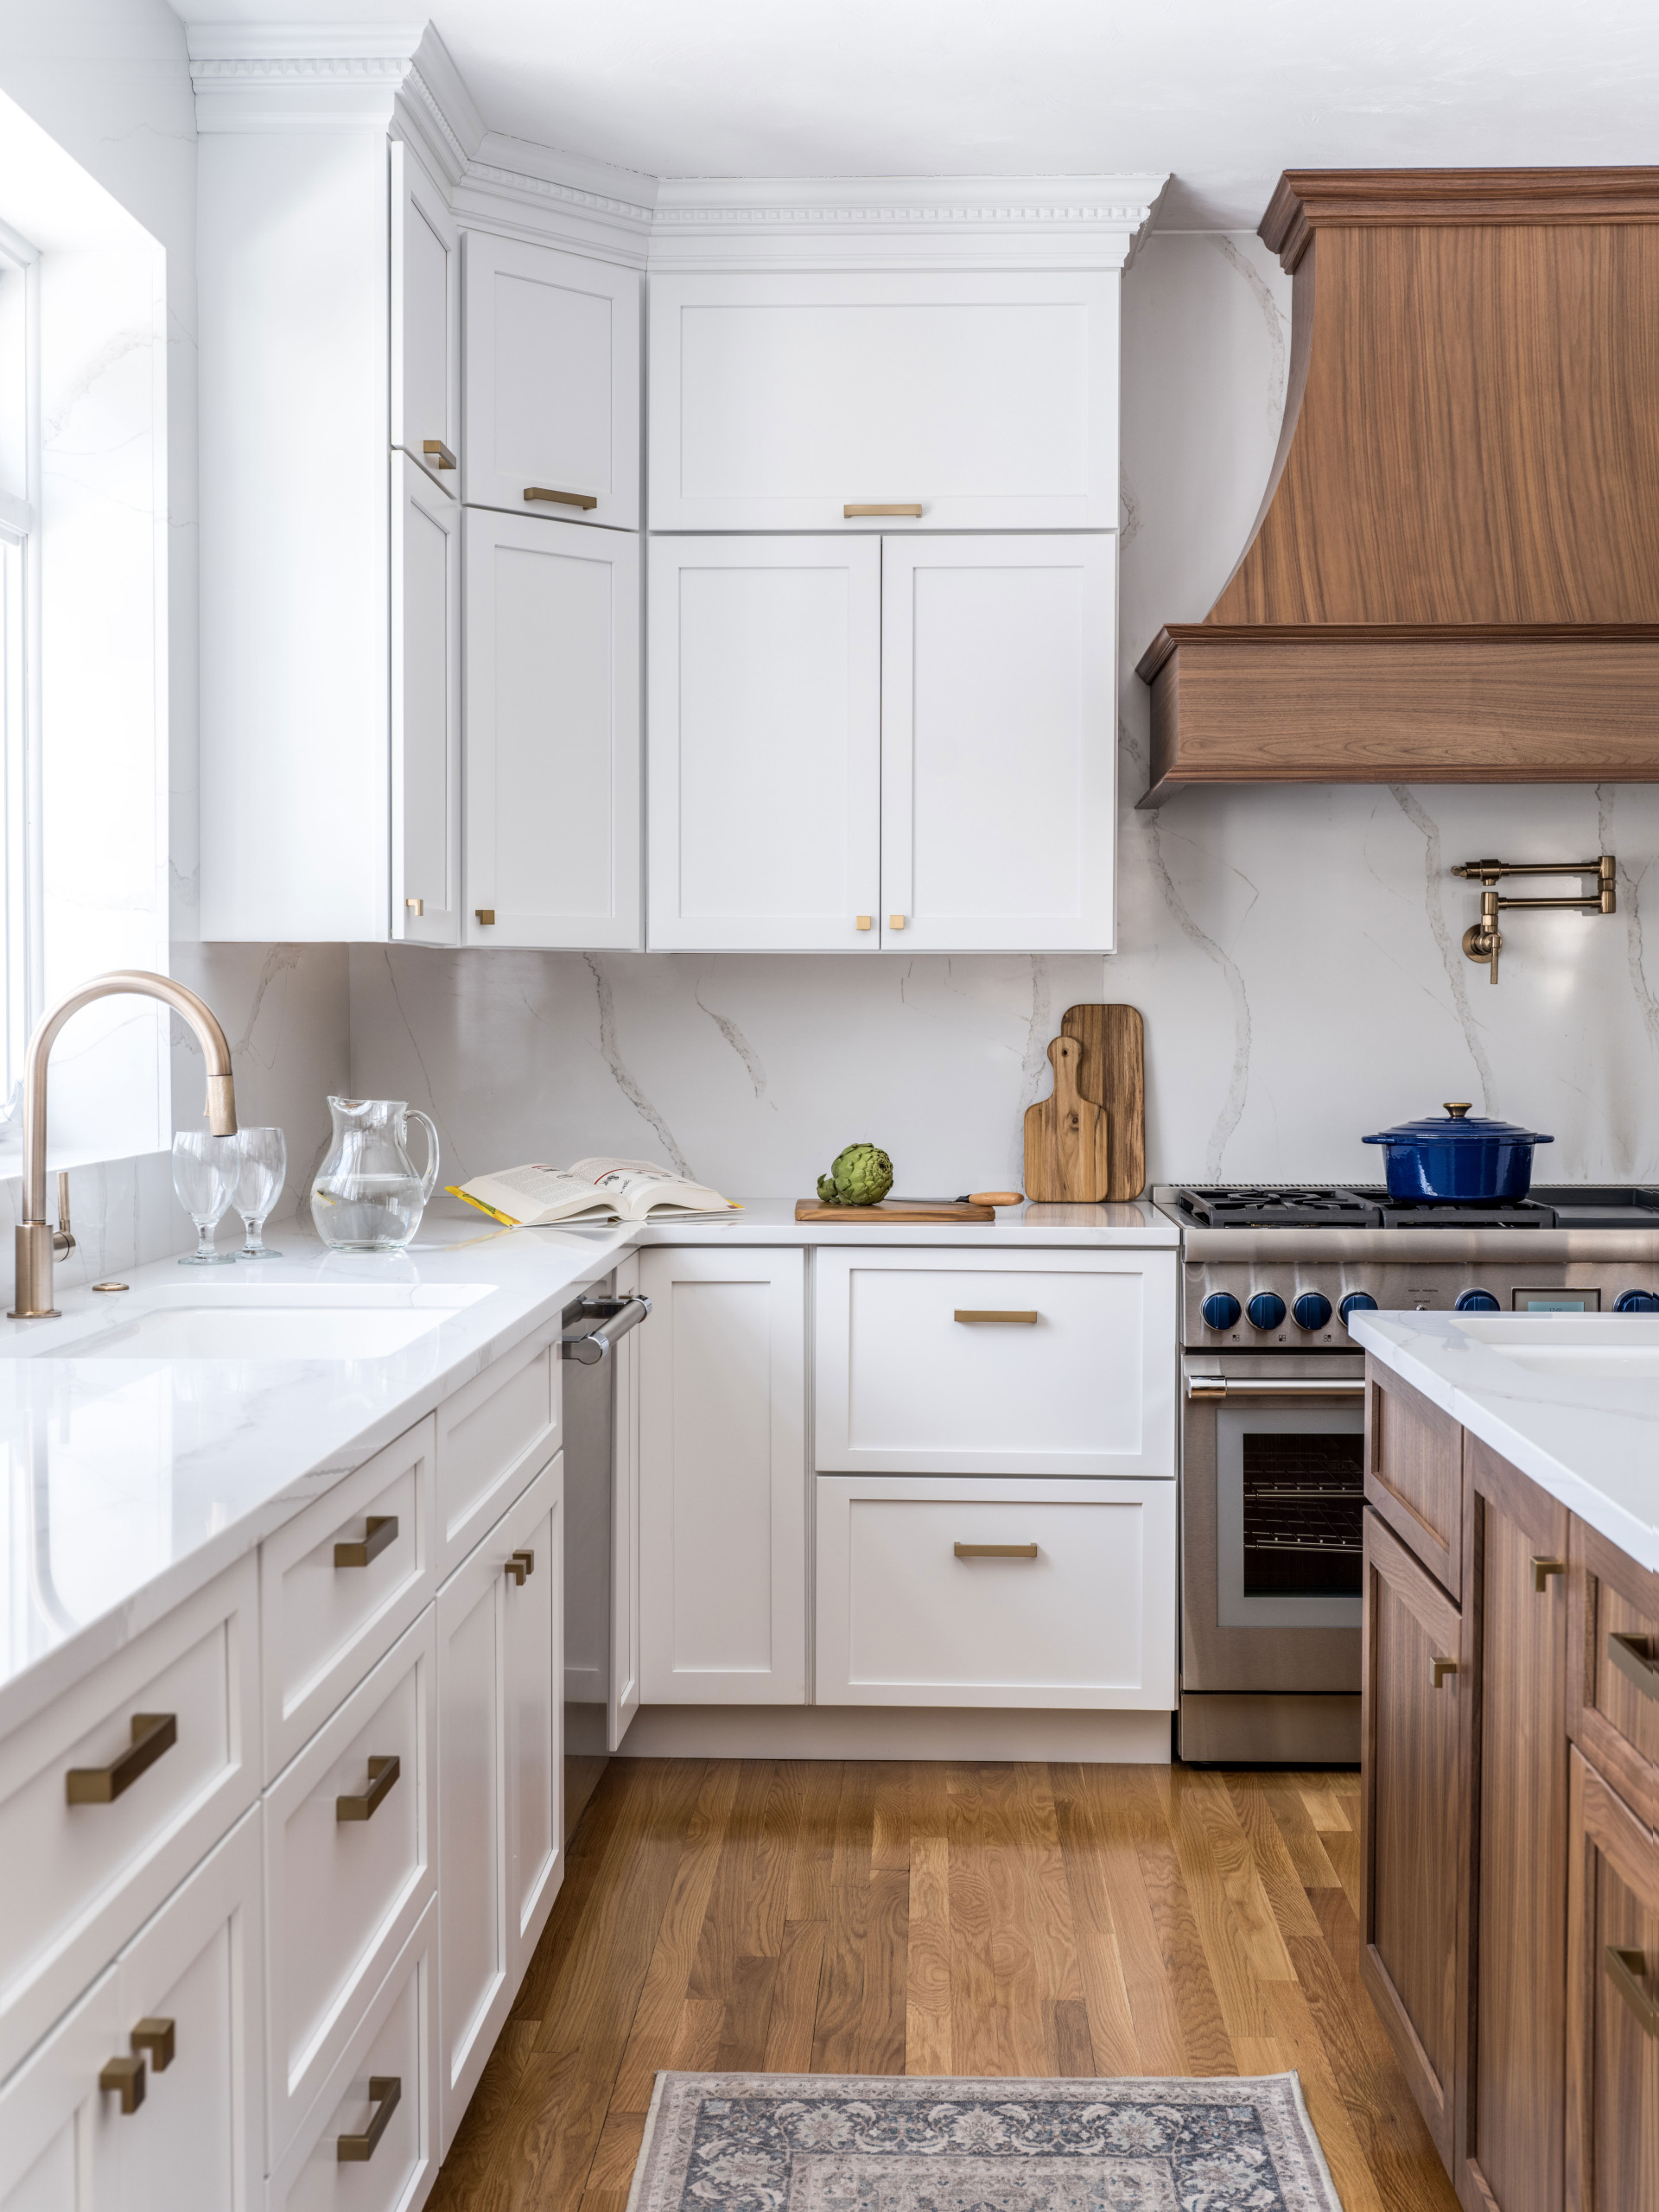 White Cabinets with Polished Brass Hardware - Transitional - Kitchen   White shaker kitchen, Classic white kitchen, White shaker kitchen cabinets